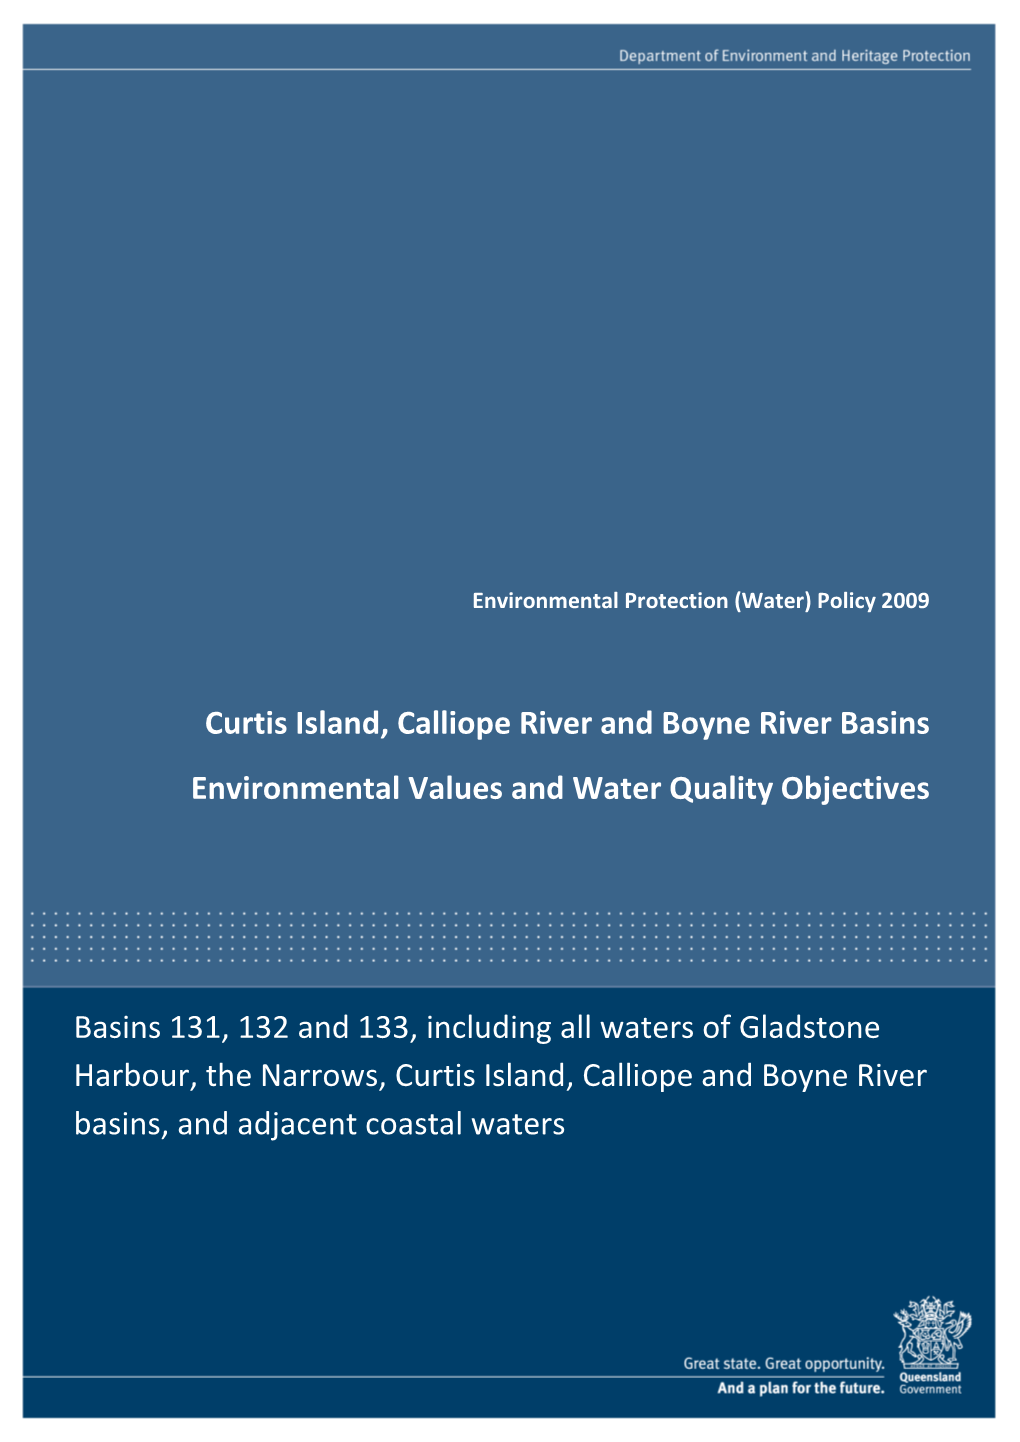 Curtis Island, Calliope River and Boyne River Basins Environmental Values and Water Quality Objectives